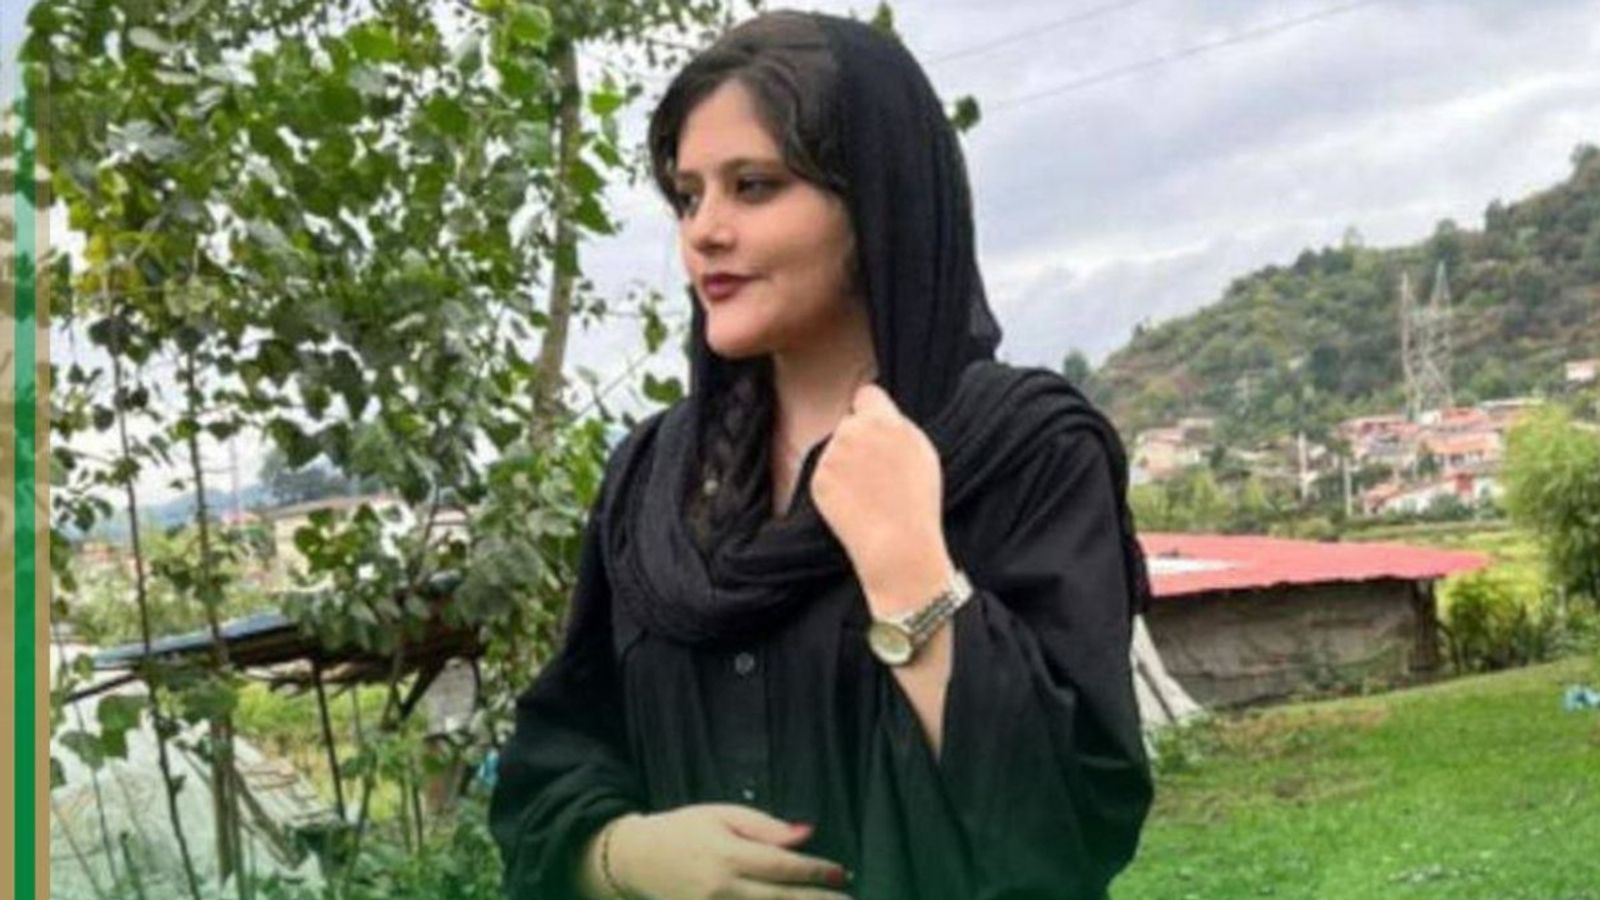 Iran morality police behind detention of Mahsa Amini 'shut down', official says